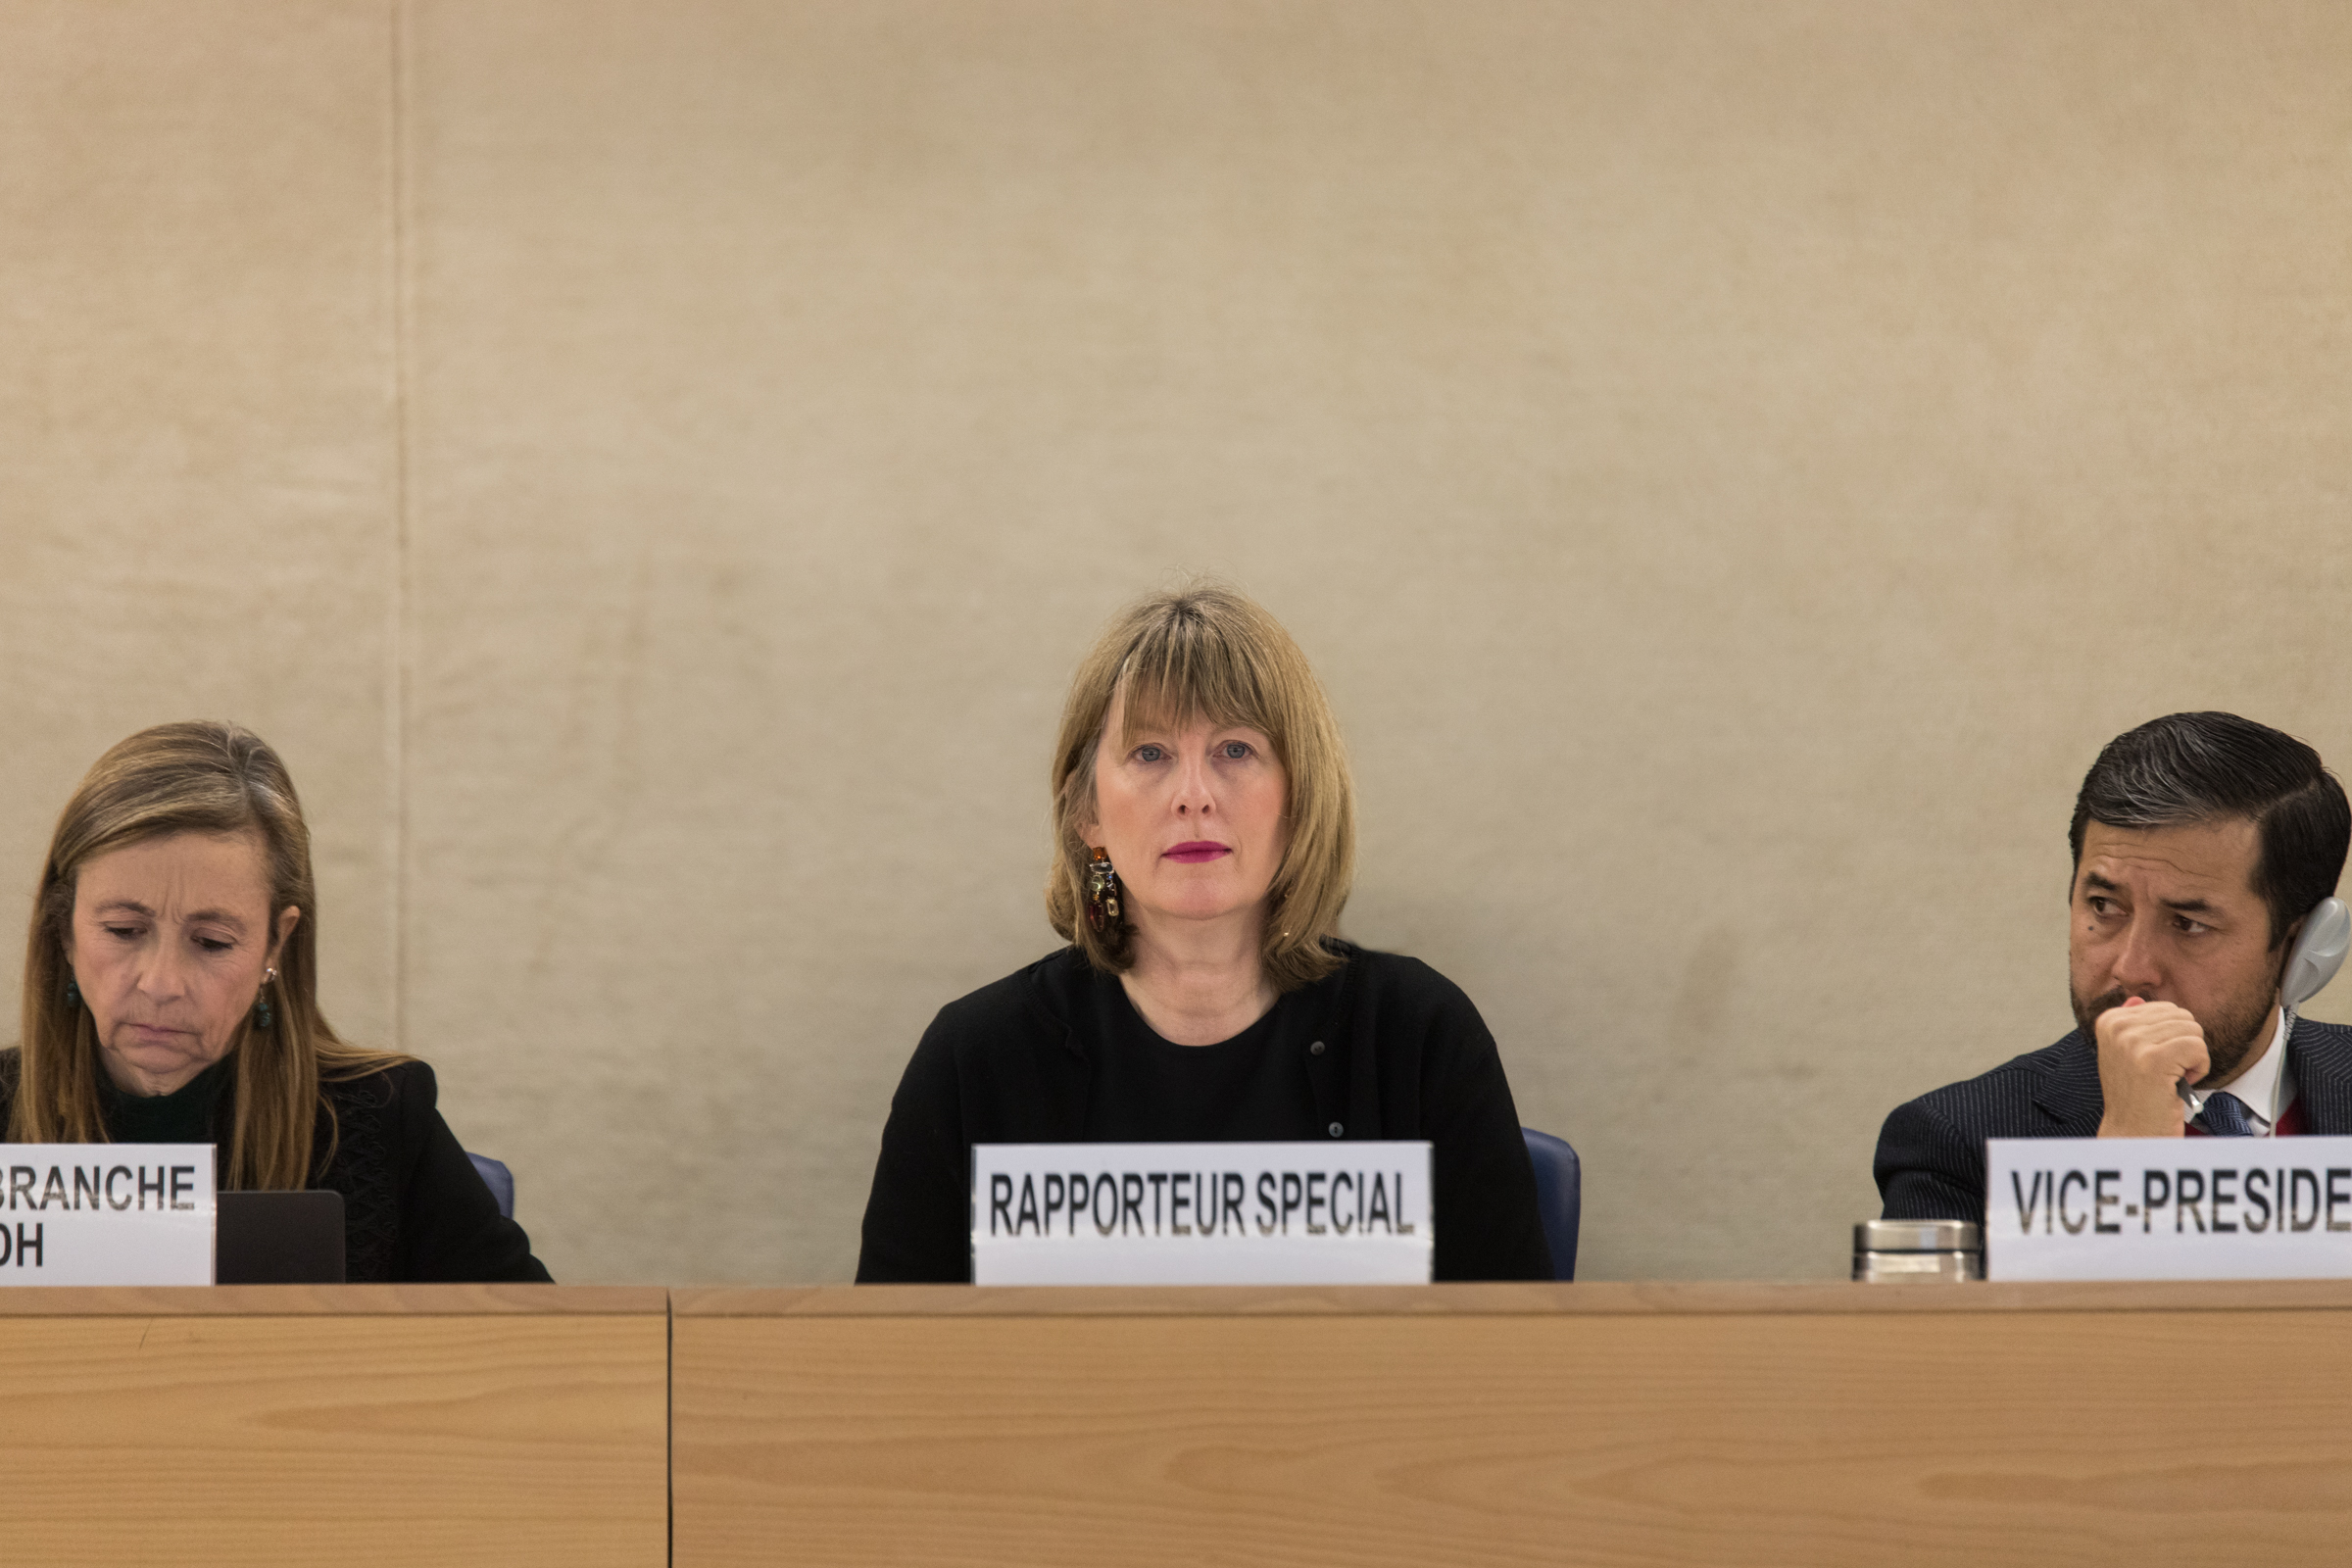 University of Minnesota Law Professor Fionnuala Ni Aolain serves as the United Nation’s Special Rapporteur.